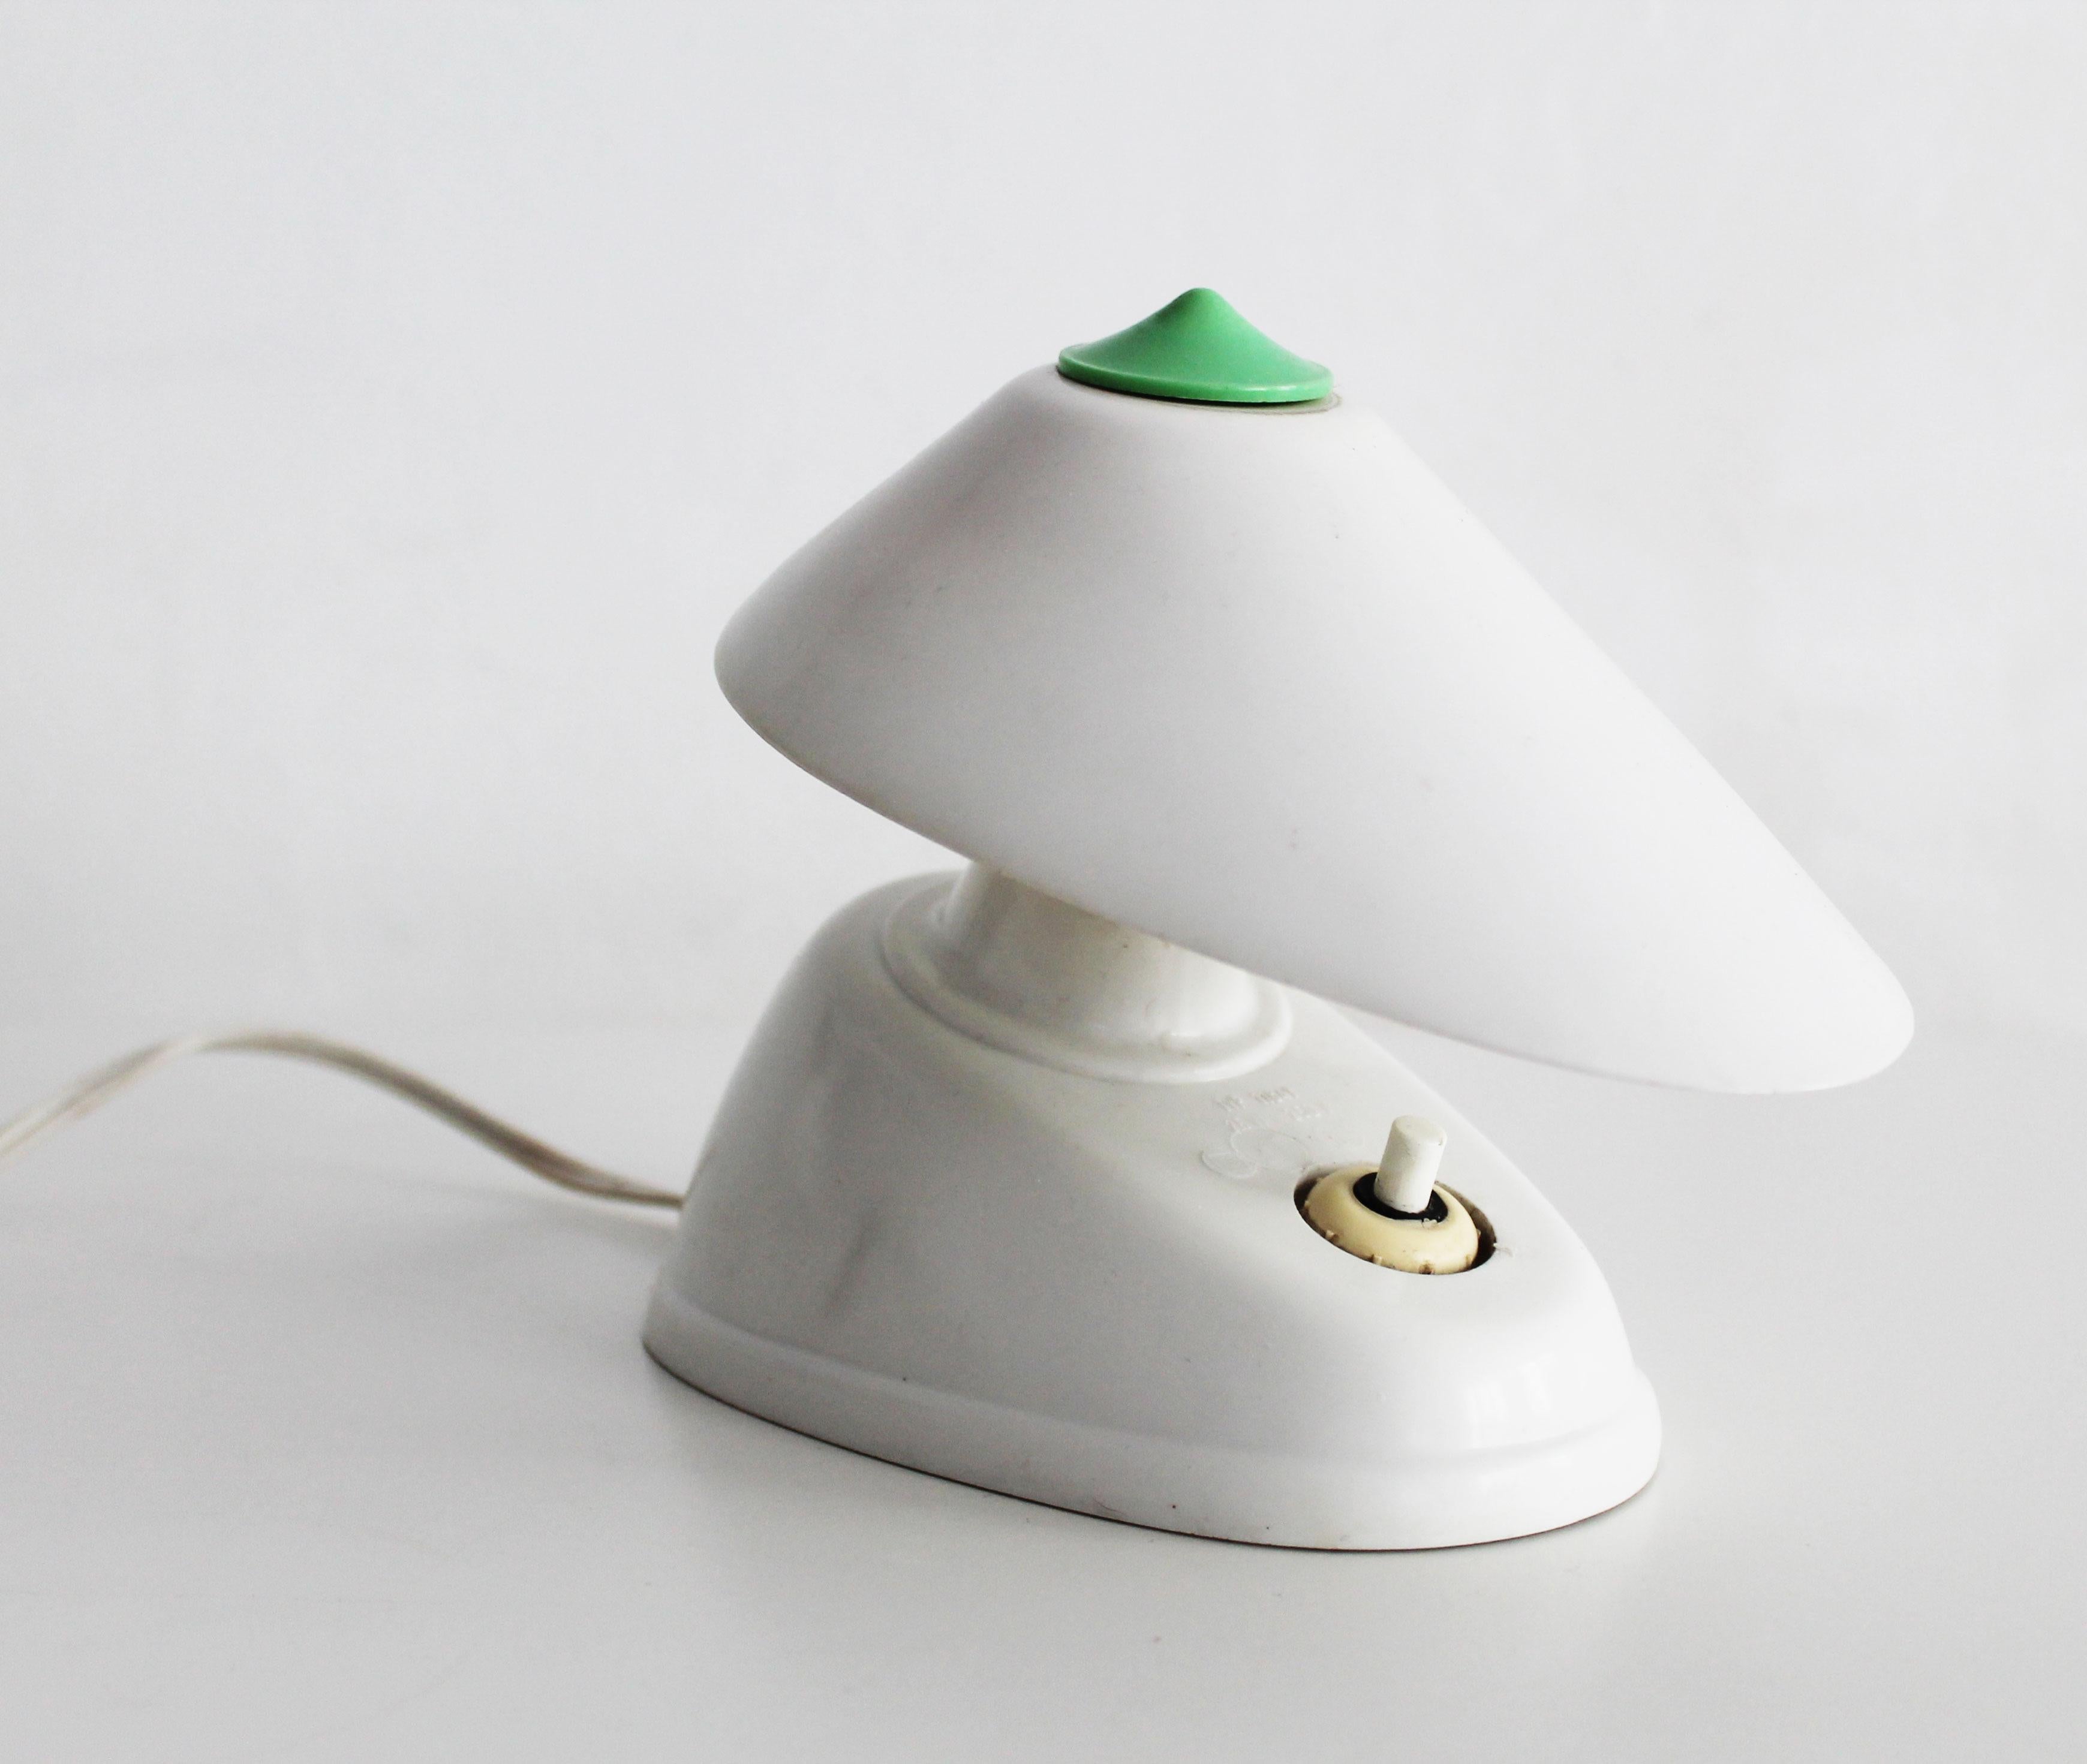 This is an original piece produced by Eletroskvit Nove Zamky in former Czechoslovakia. This lamp is made of white bakelite and can be hang as wall light or simply used as a desk lamp.  Due to it’s strong inspiration of a pre-war modernist aesthetic,